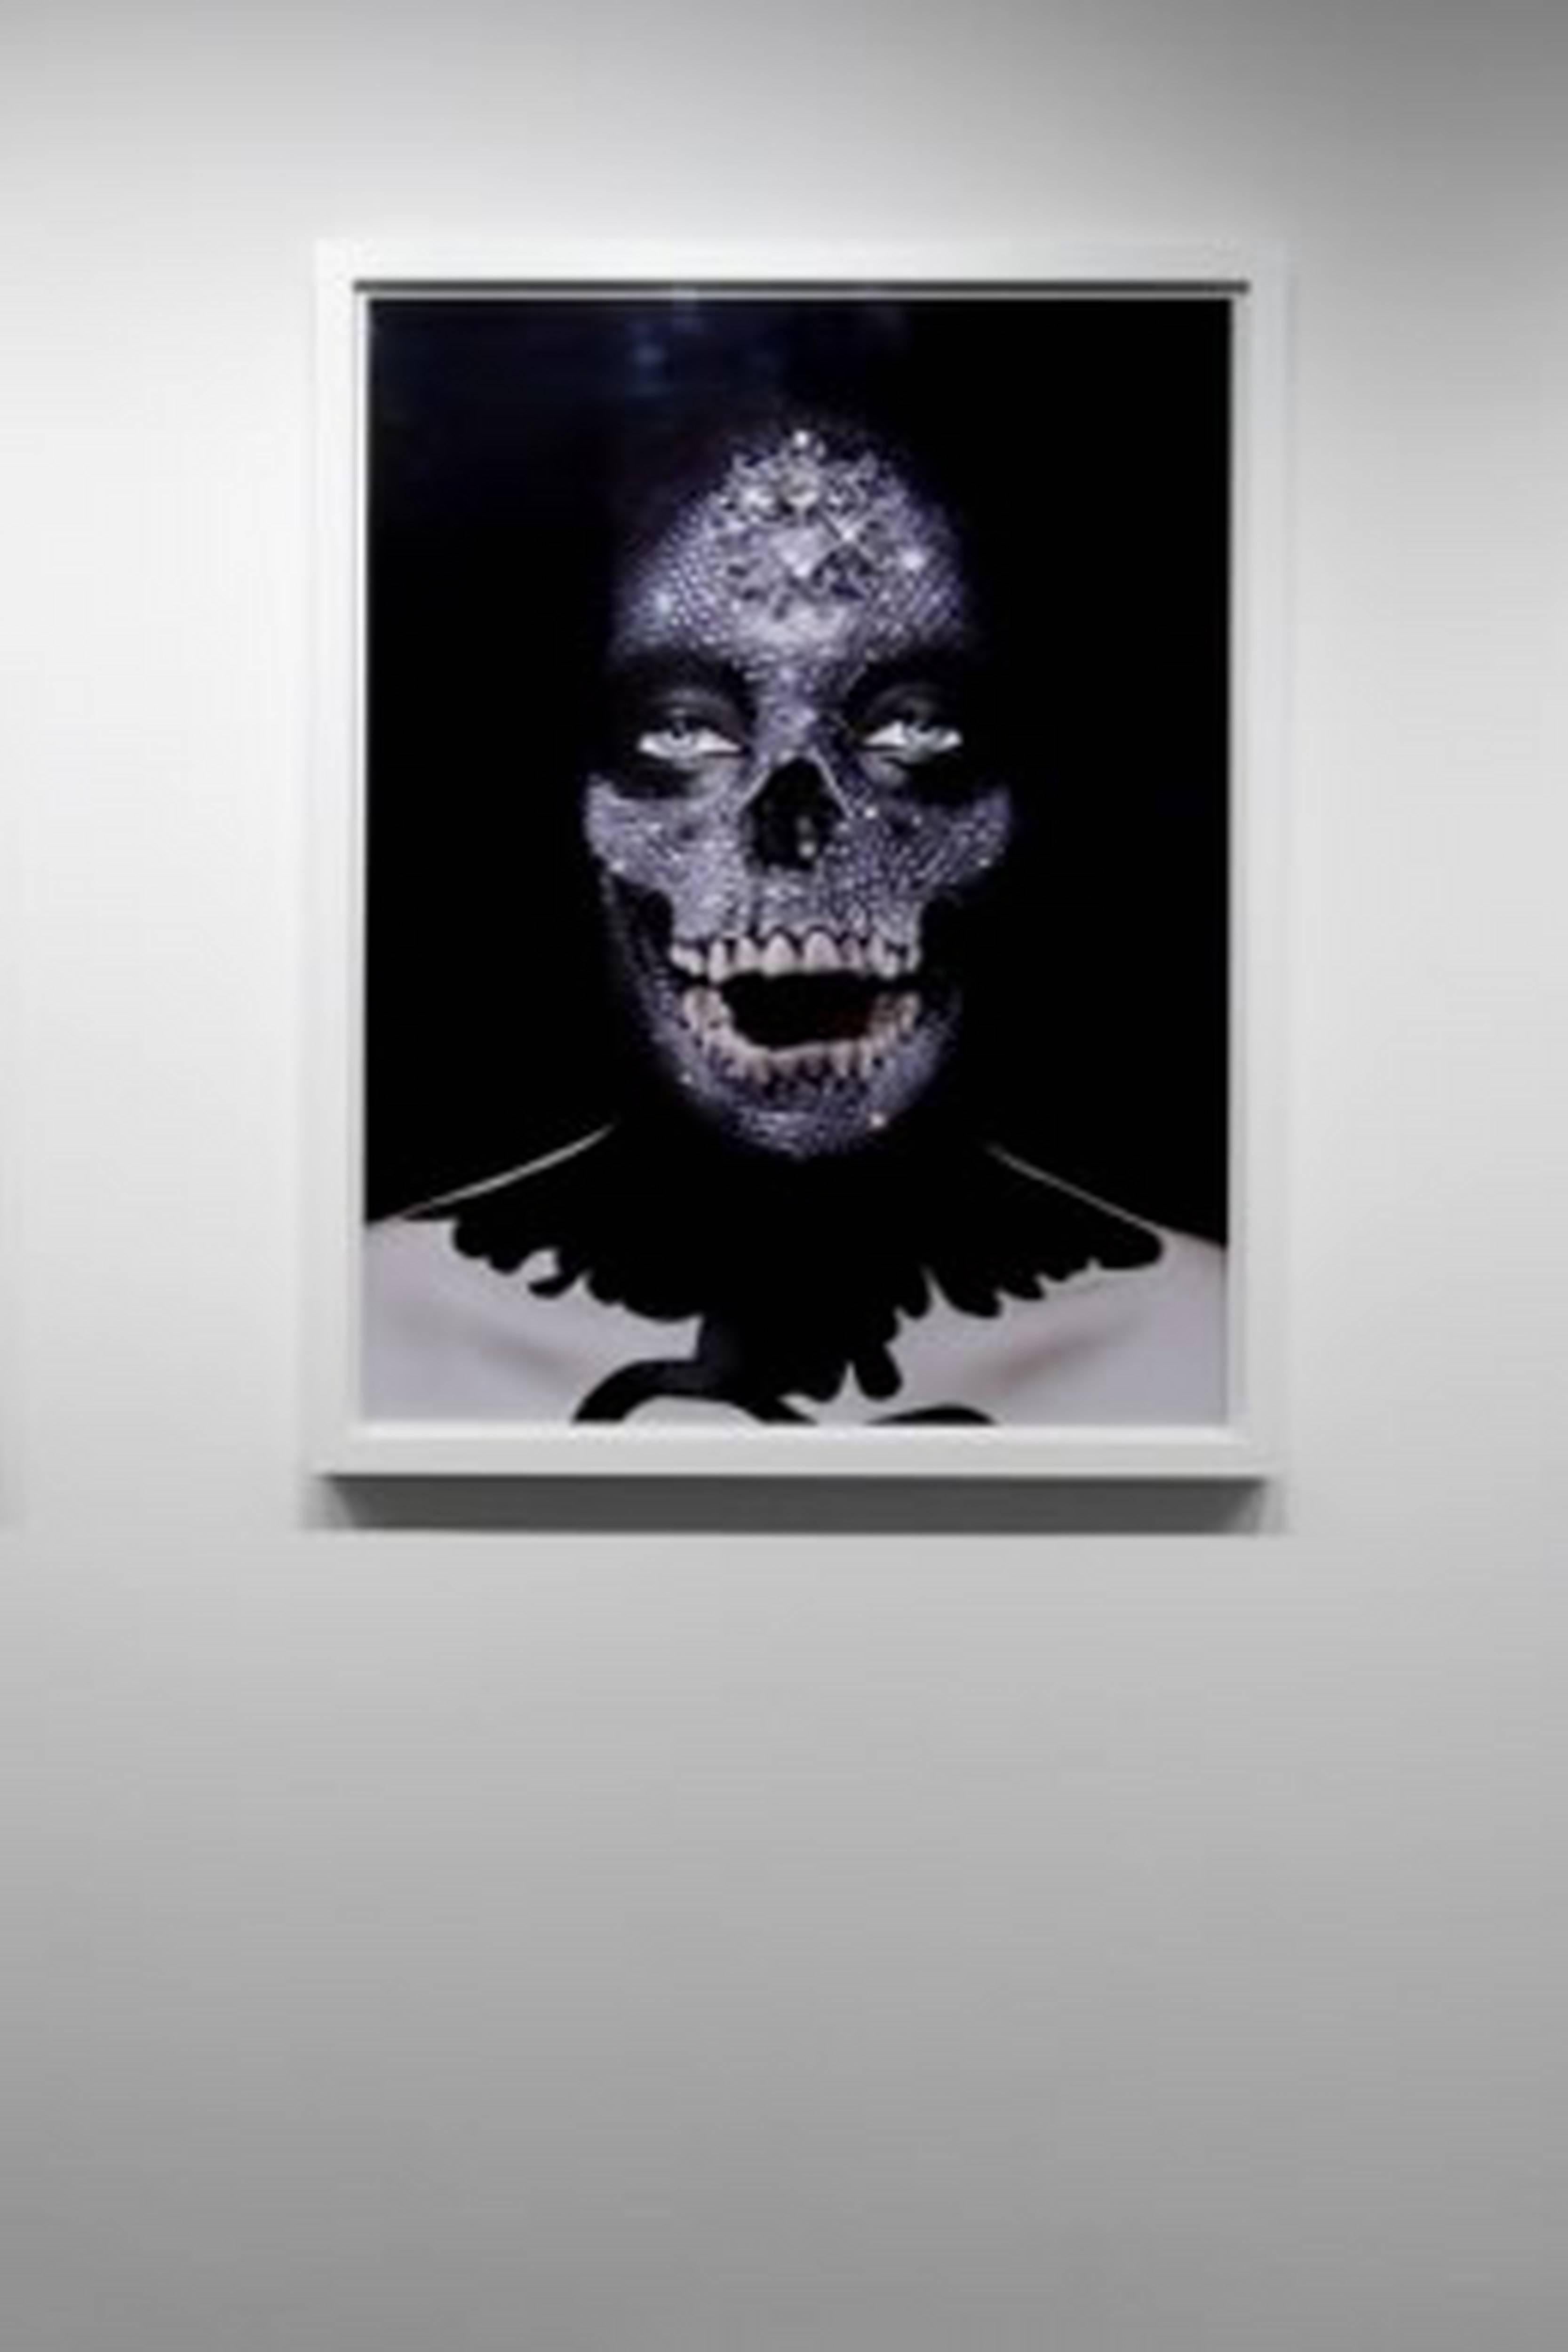 Reap - Photograph by Rankin and Damien Hirst